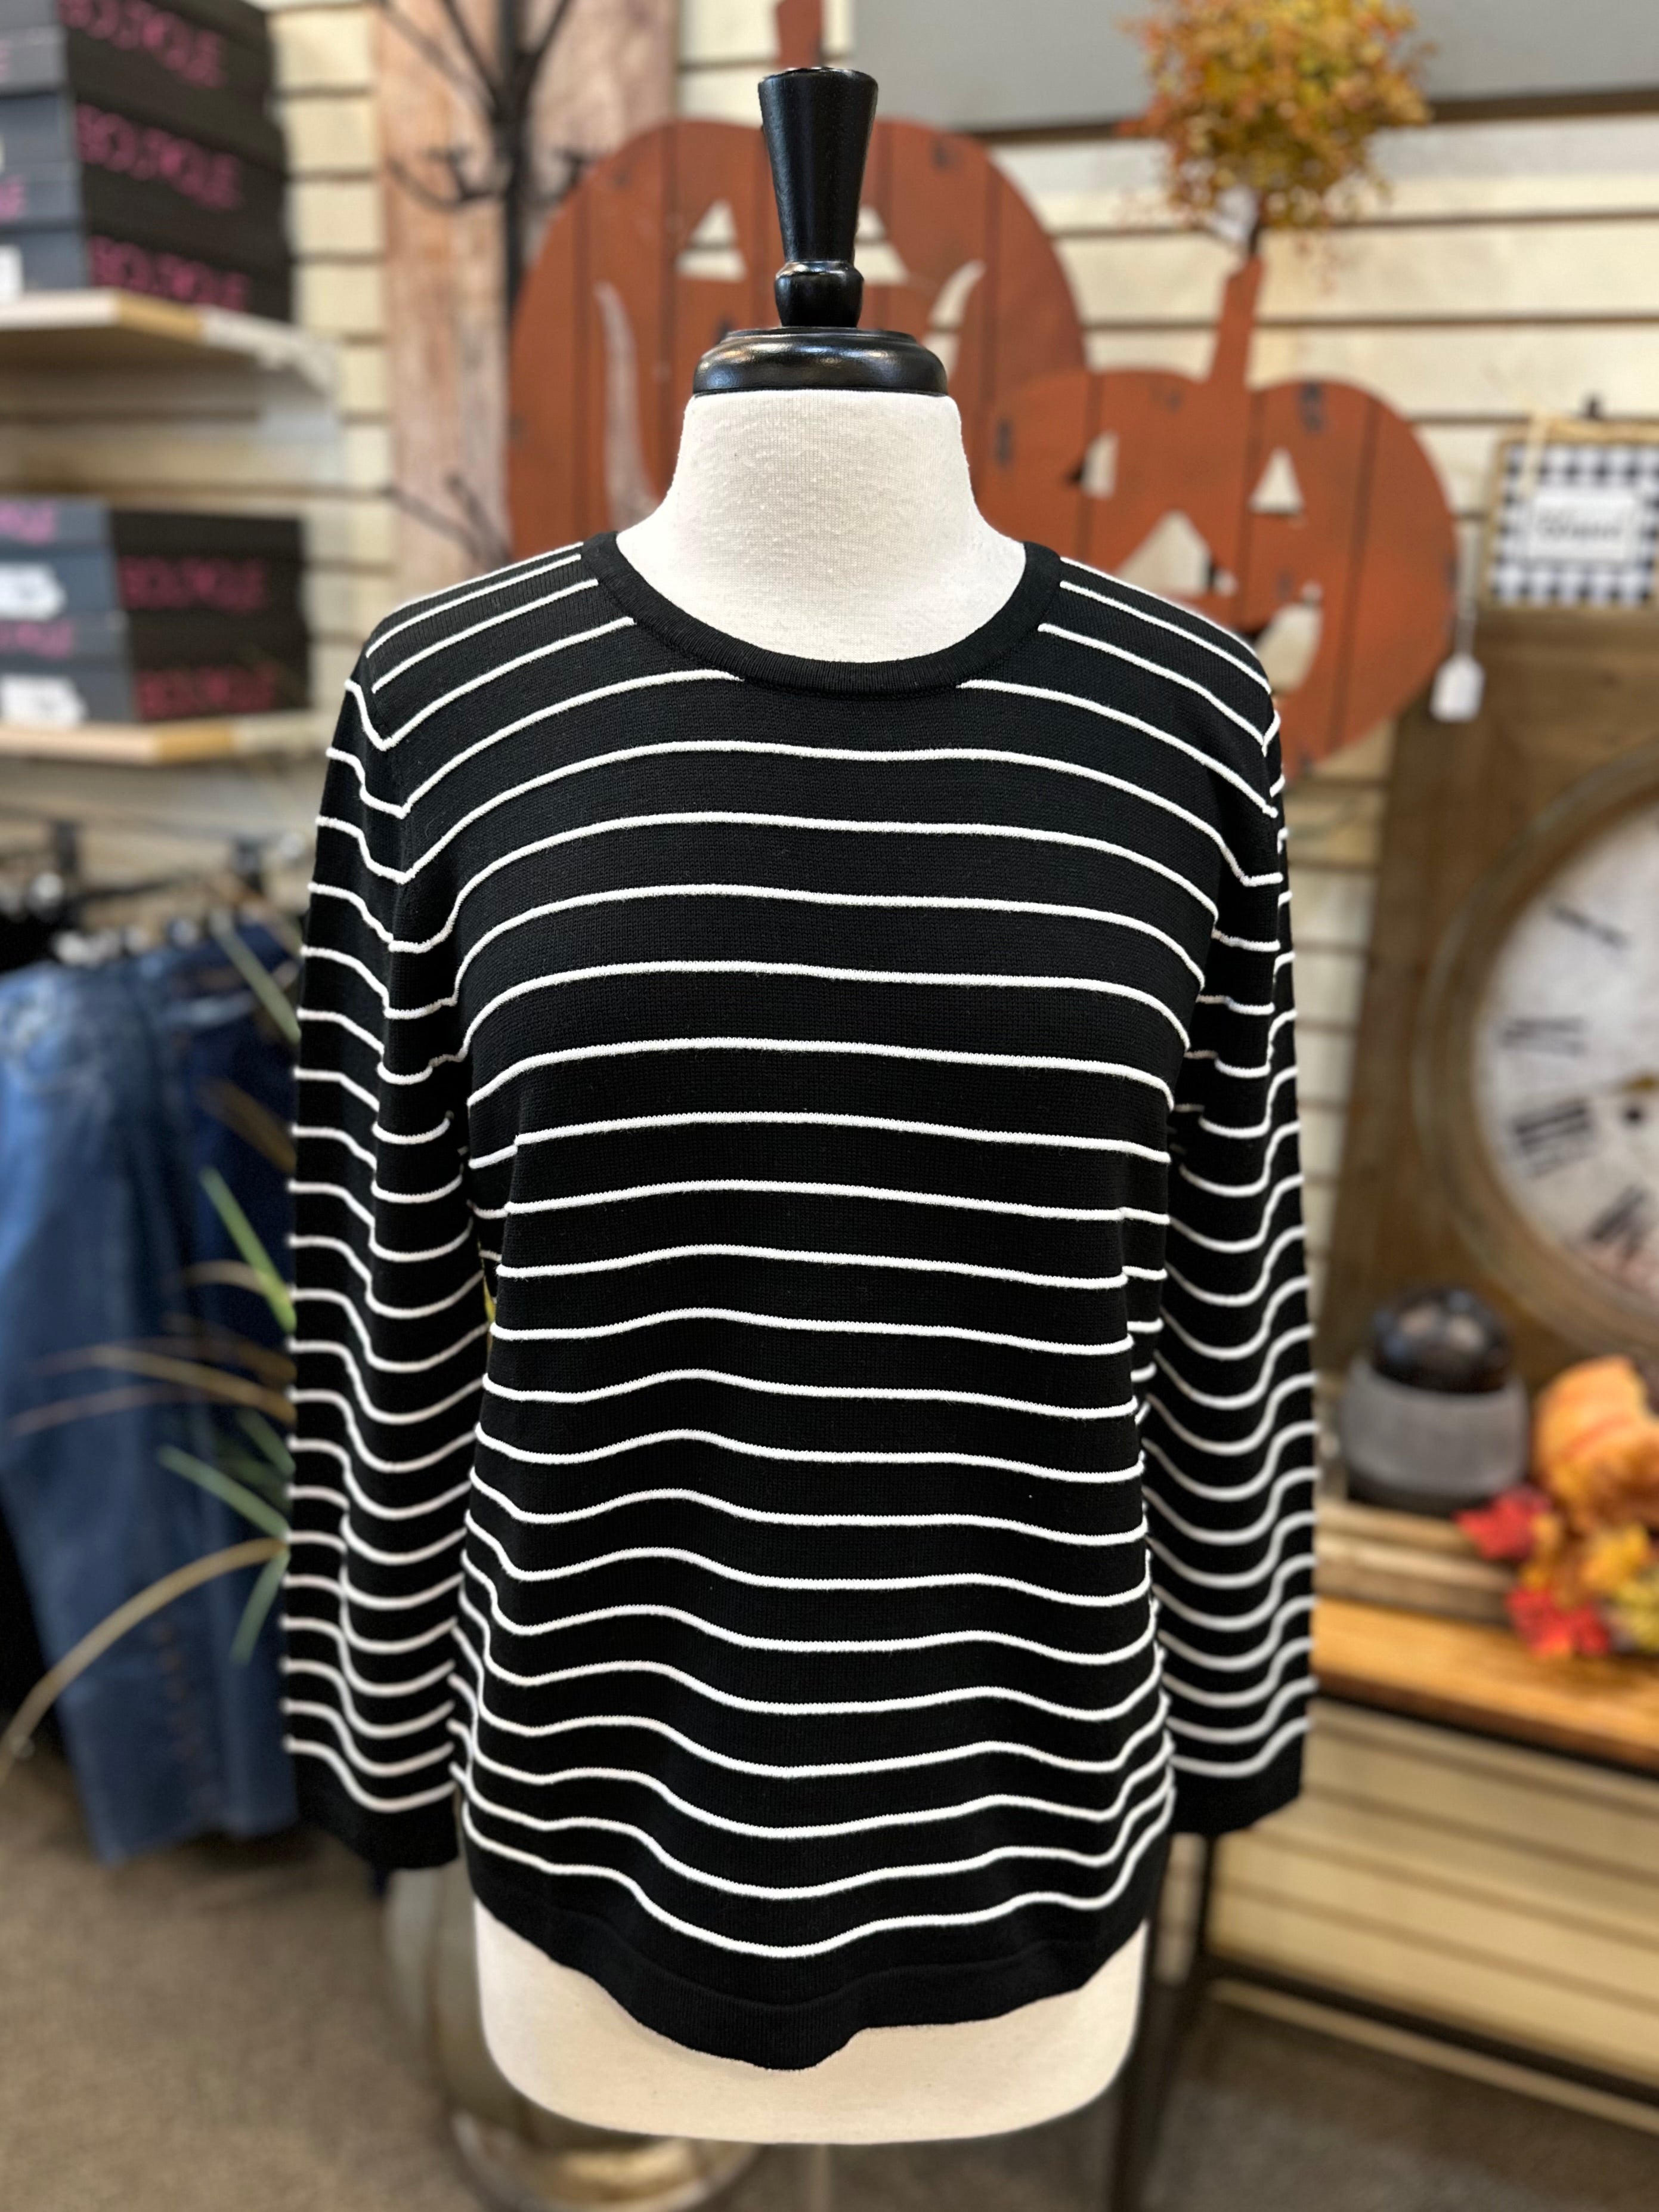 Striped Black and White Sweater by SUNDAY